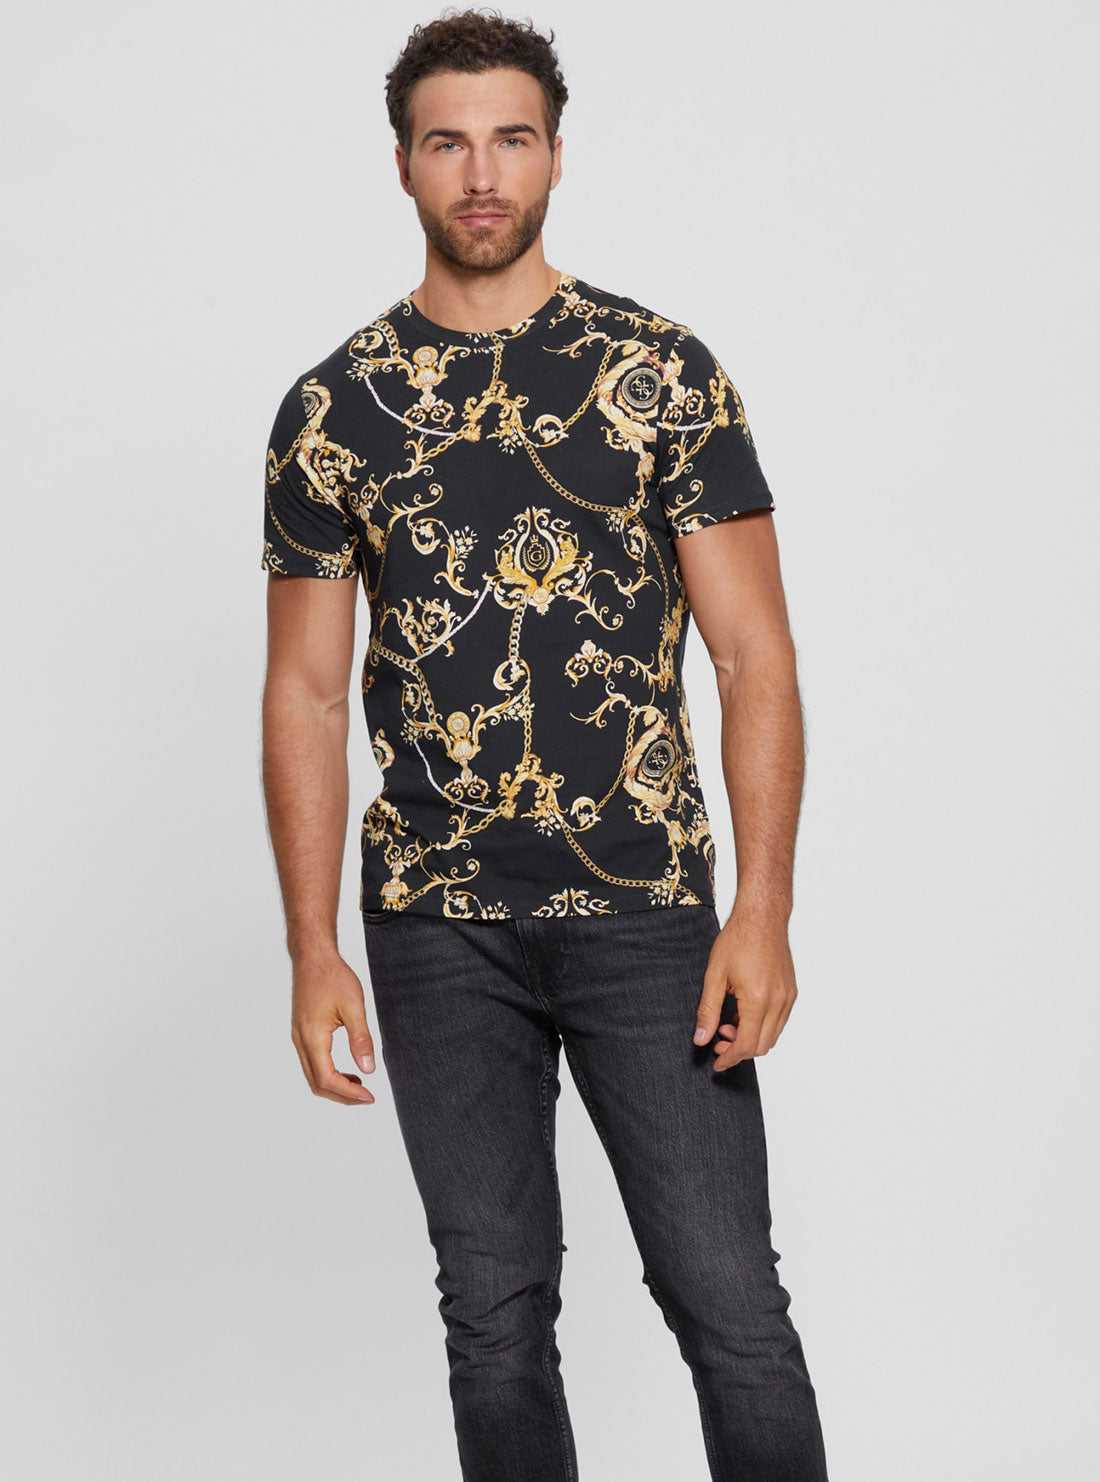 GUESS Black Gold Chain Print T-Shirt front view